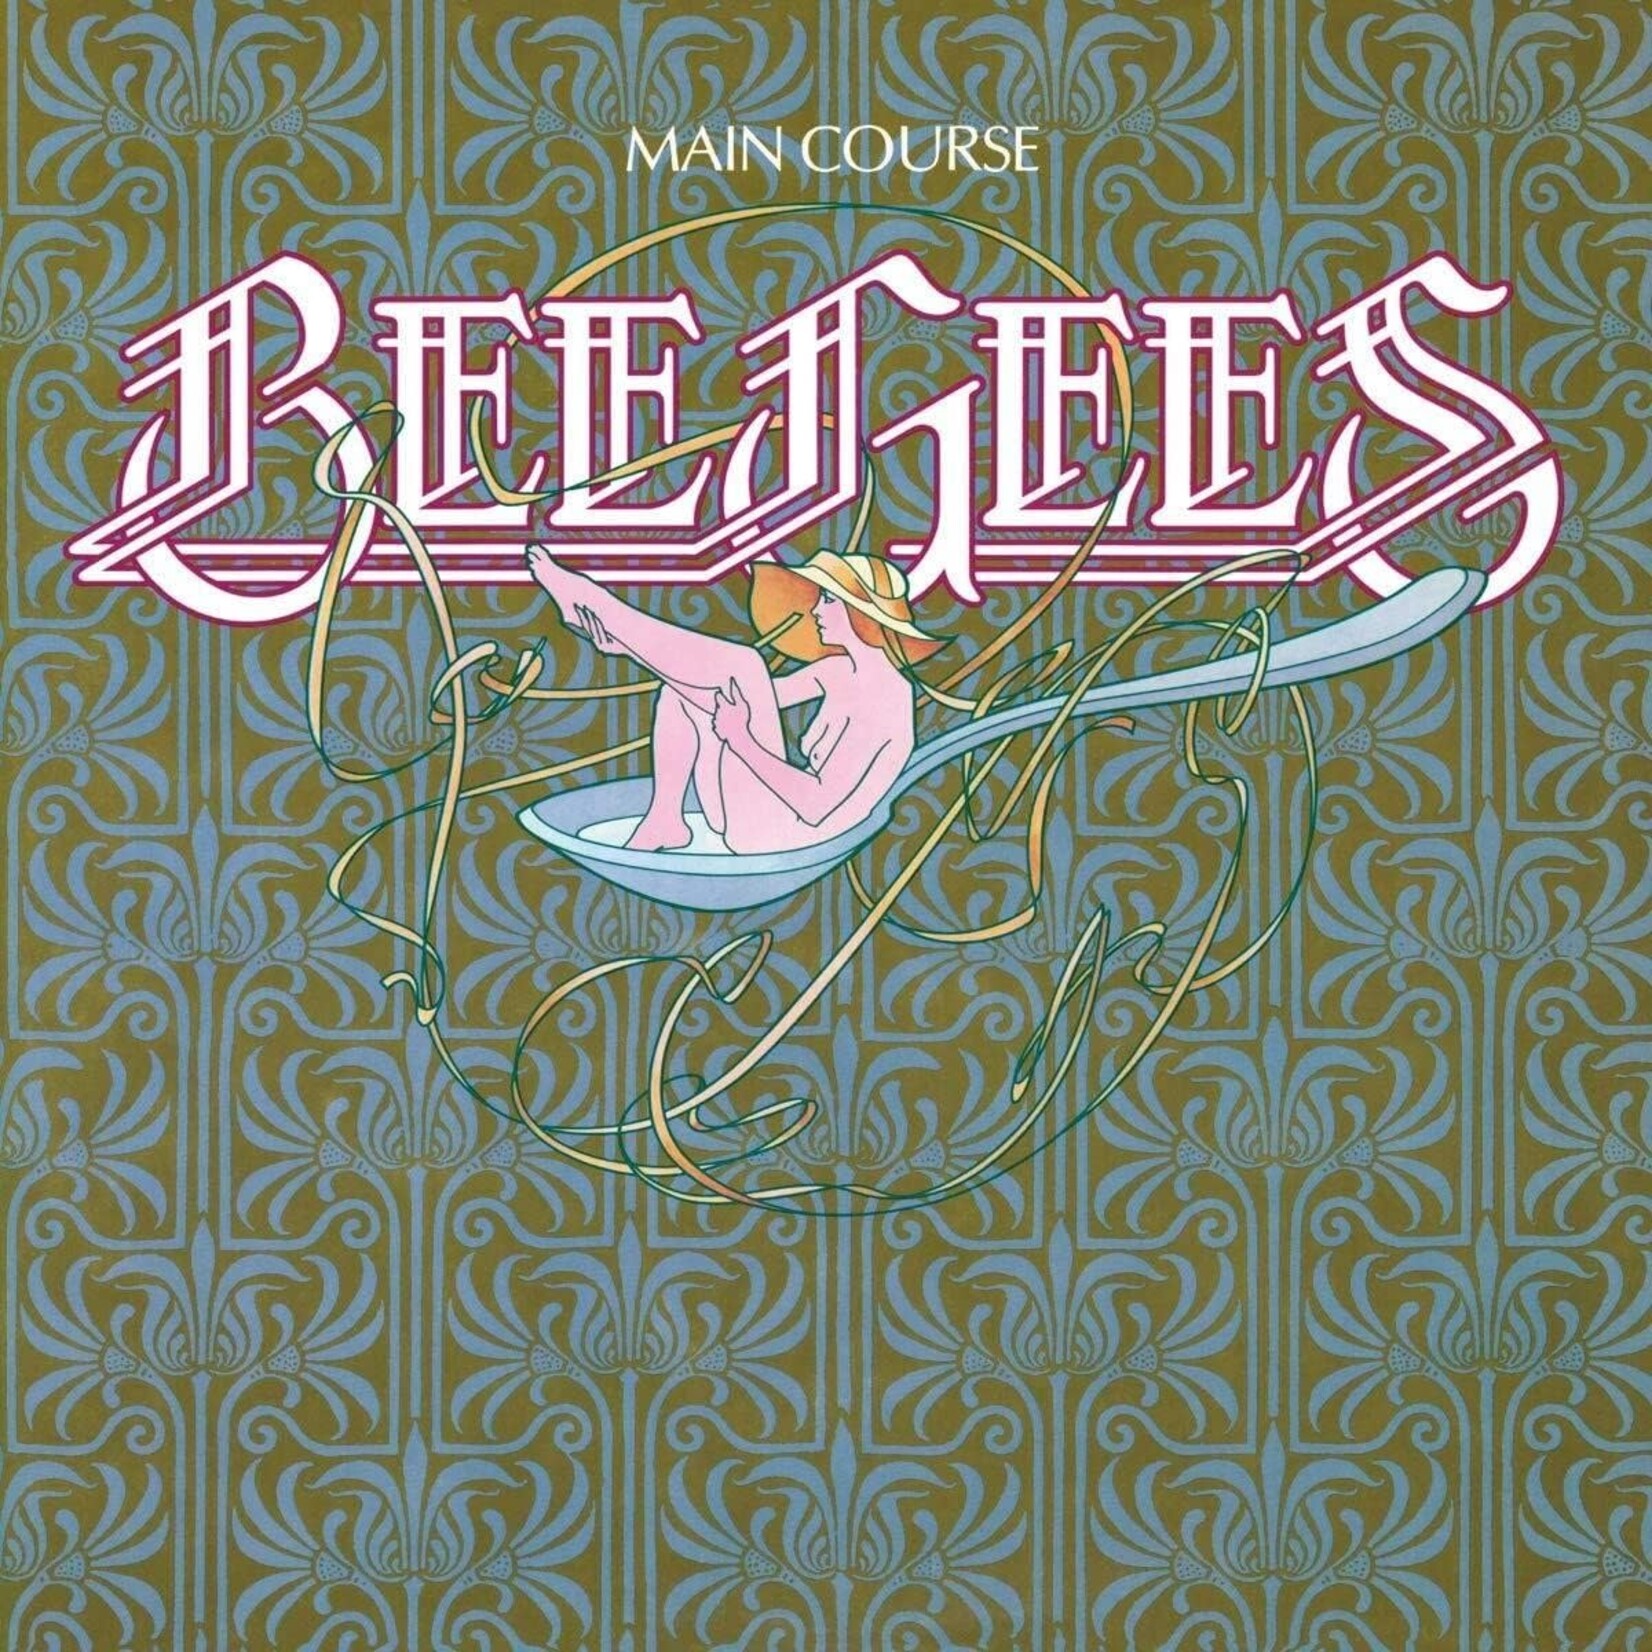 Bee Gees - Main Course [LP]